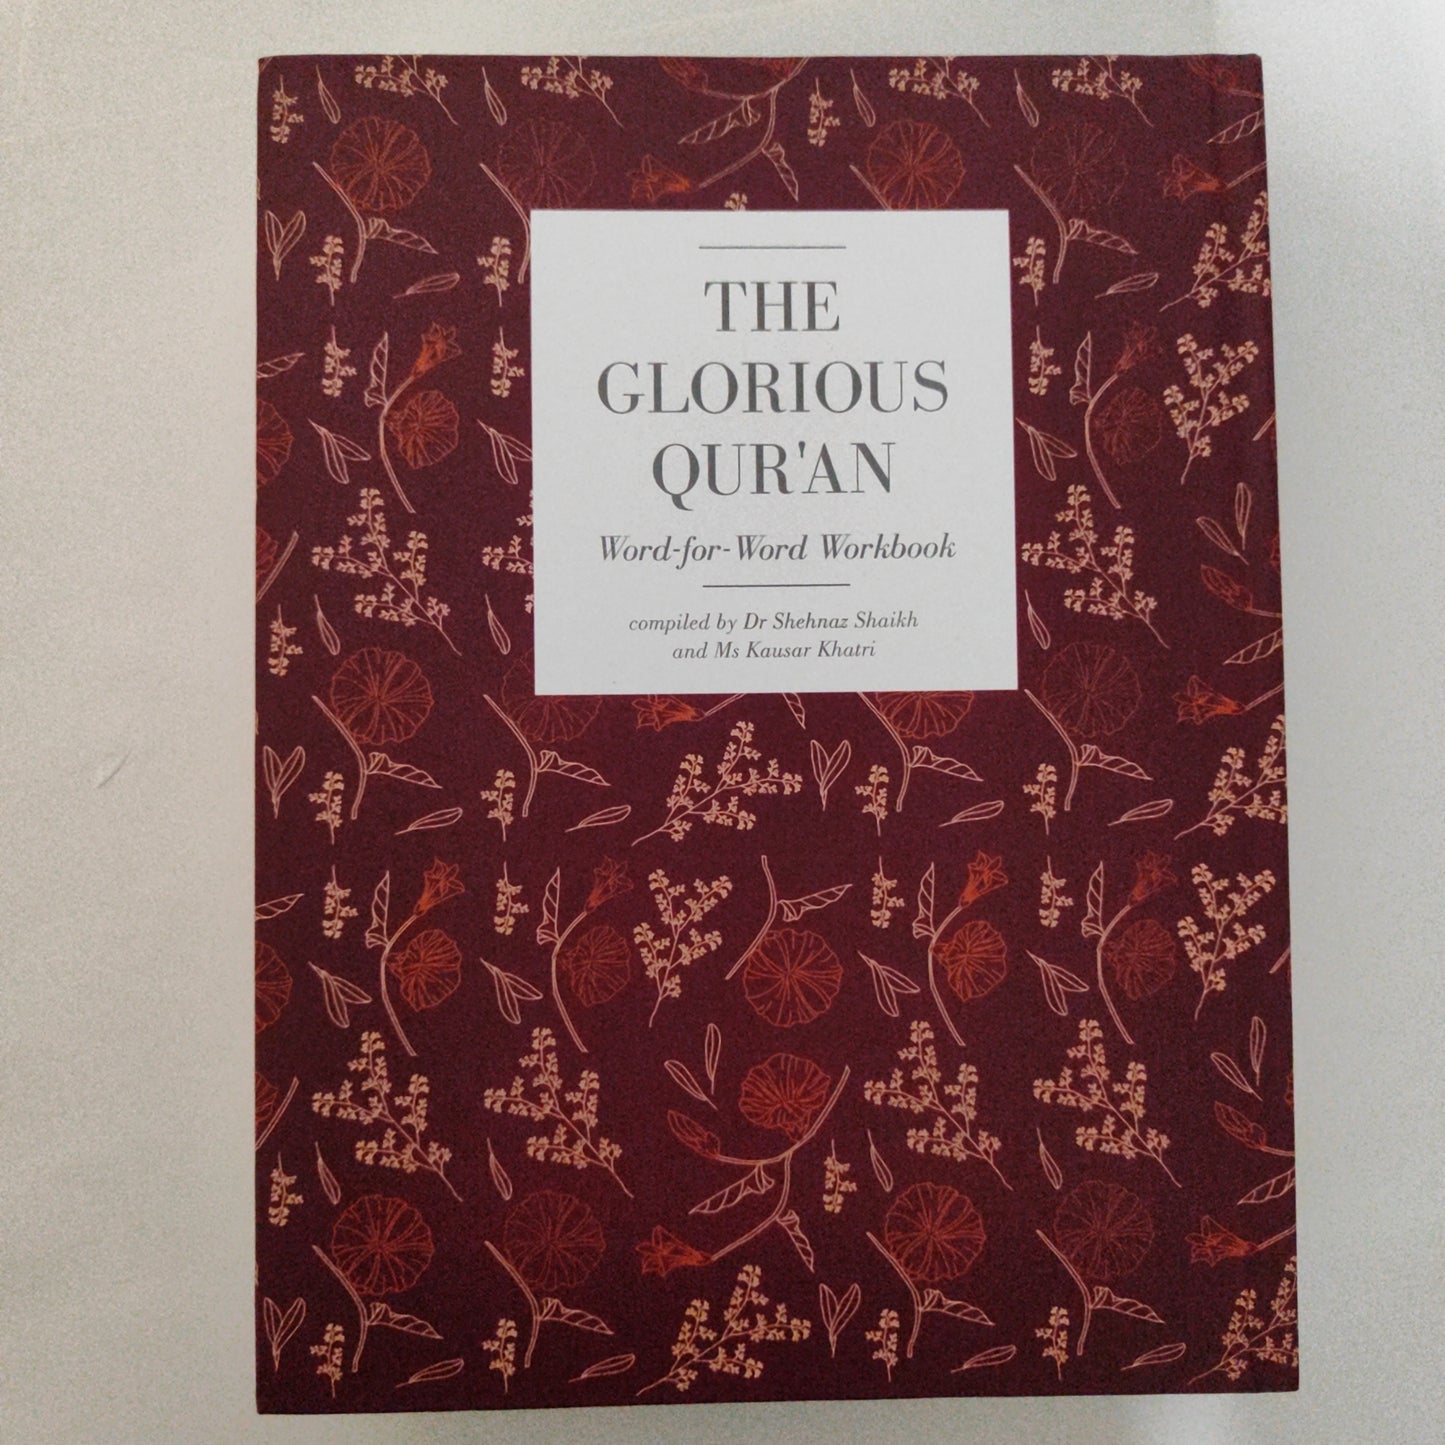 The Glorious Quran Word-for-Word Translation